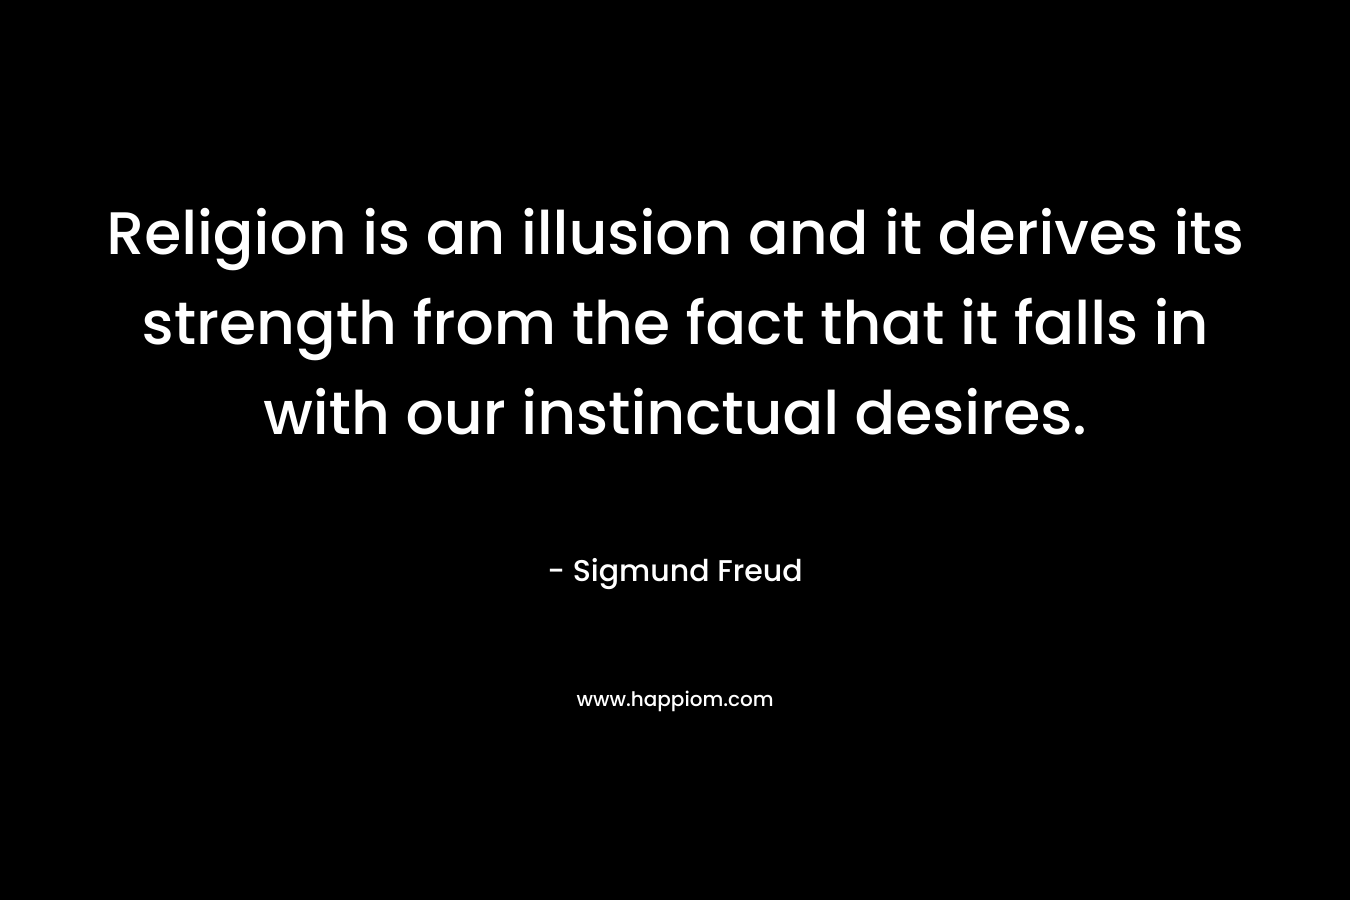 Religion is an illusion and it derives its strength from the fact that it falls in with our instinctual desires. – Sigmund Freud